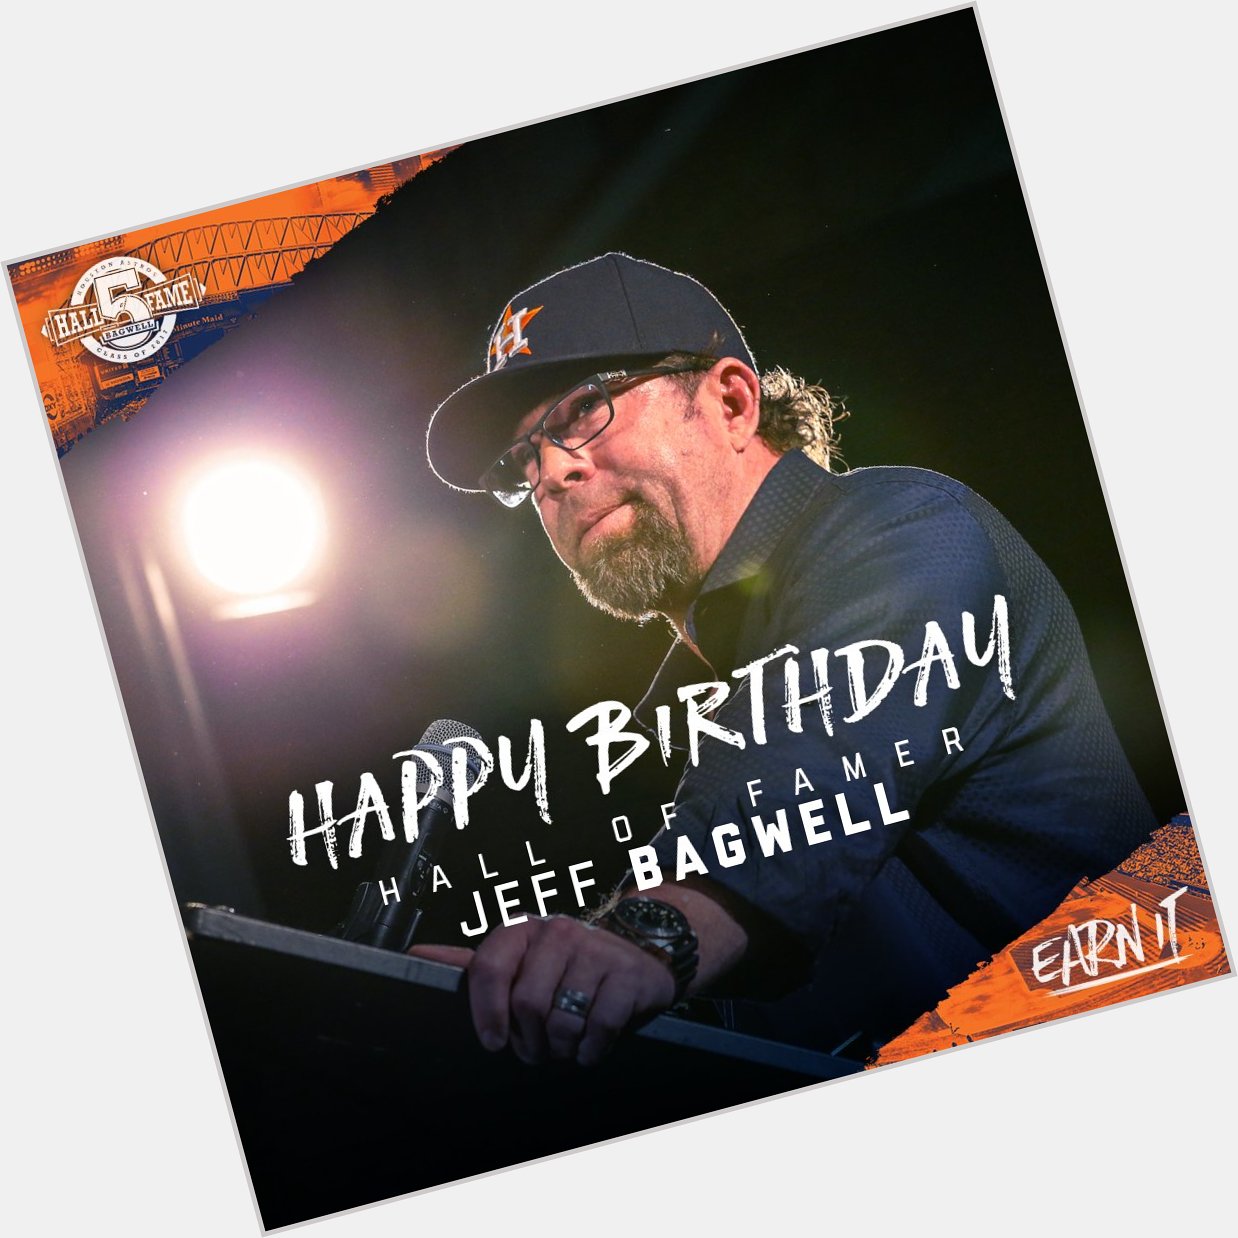 Happy birthday to legend, Hall of Famer Jeff Bagwell! 